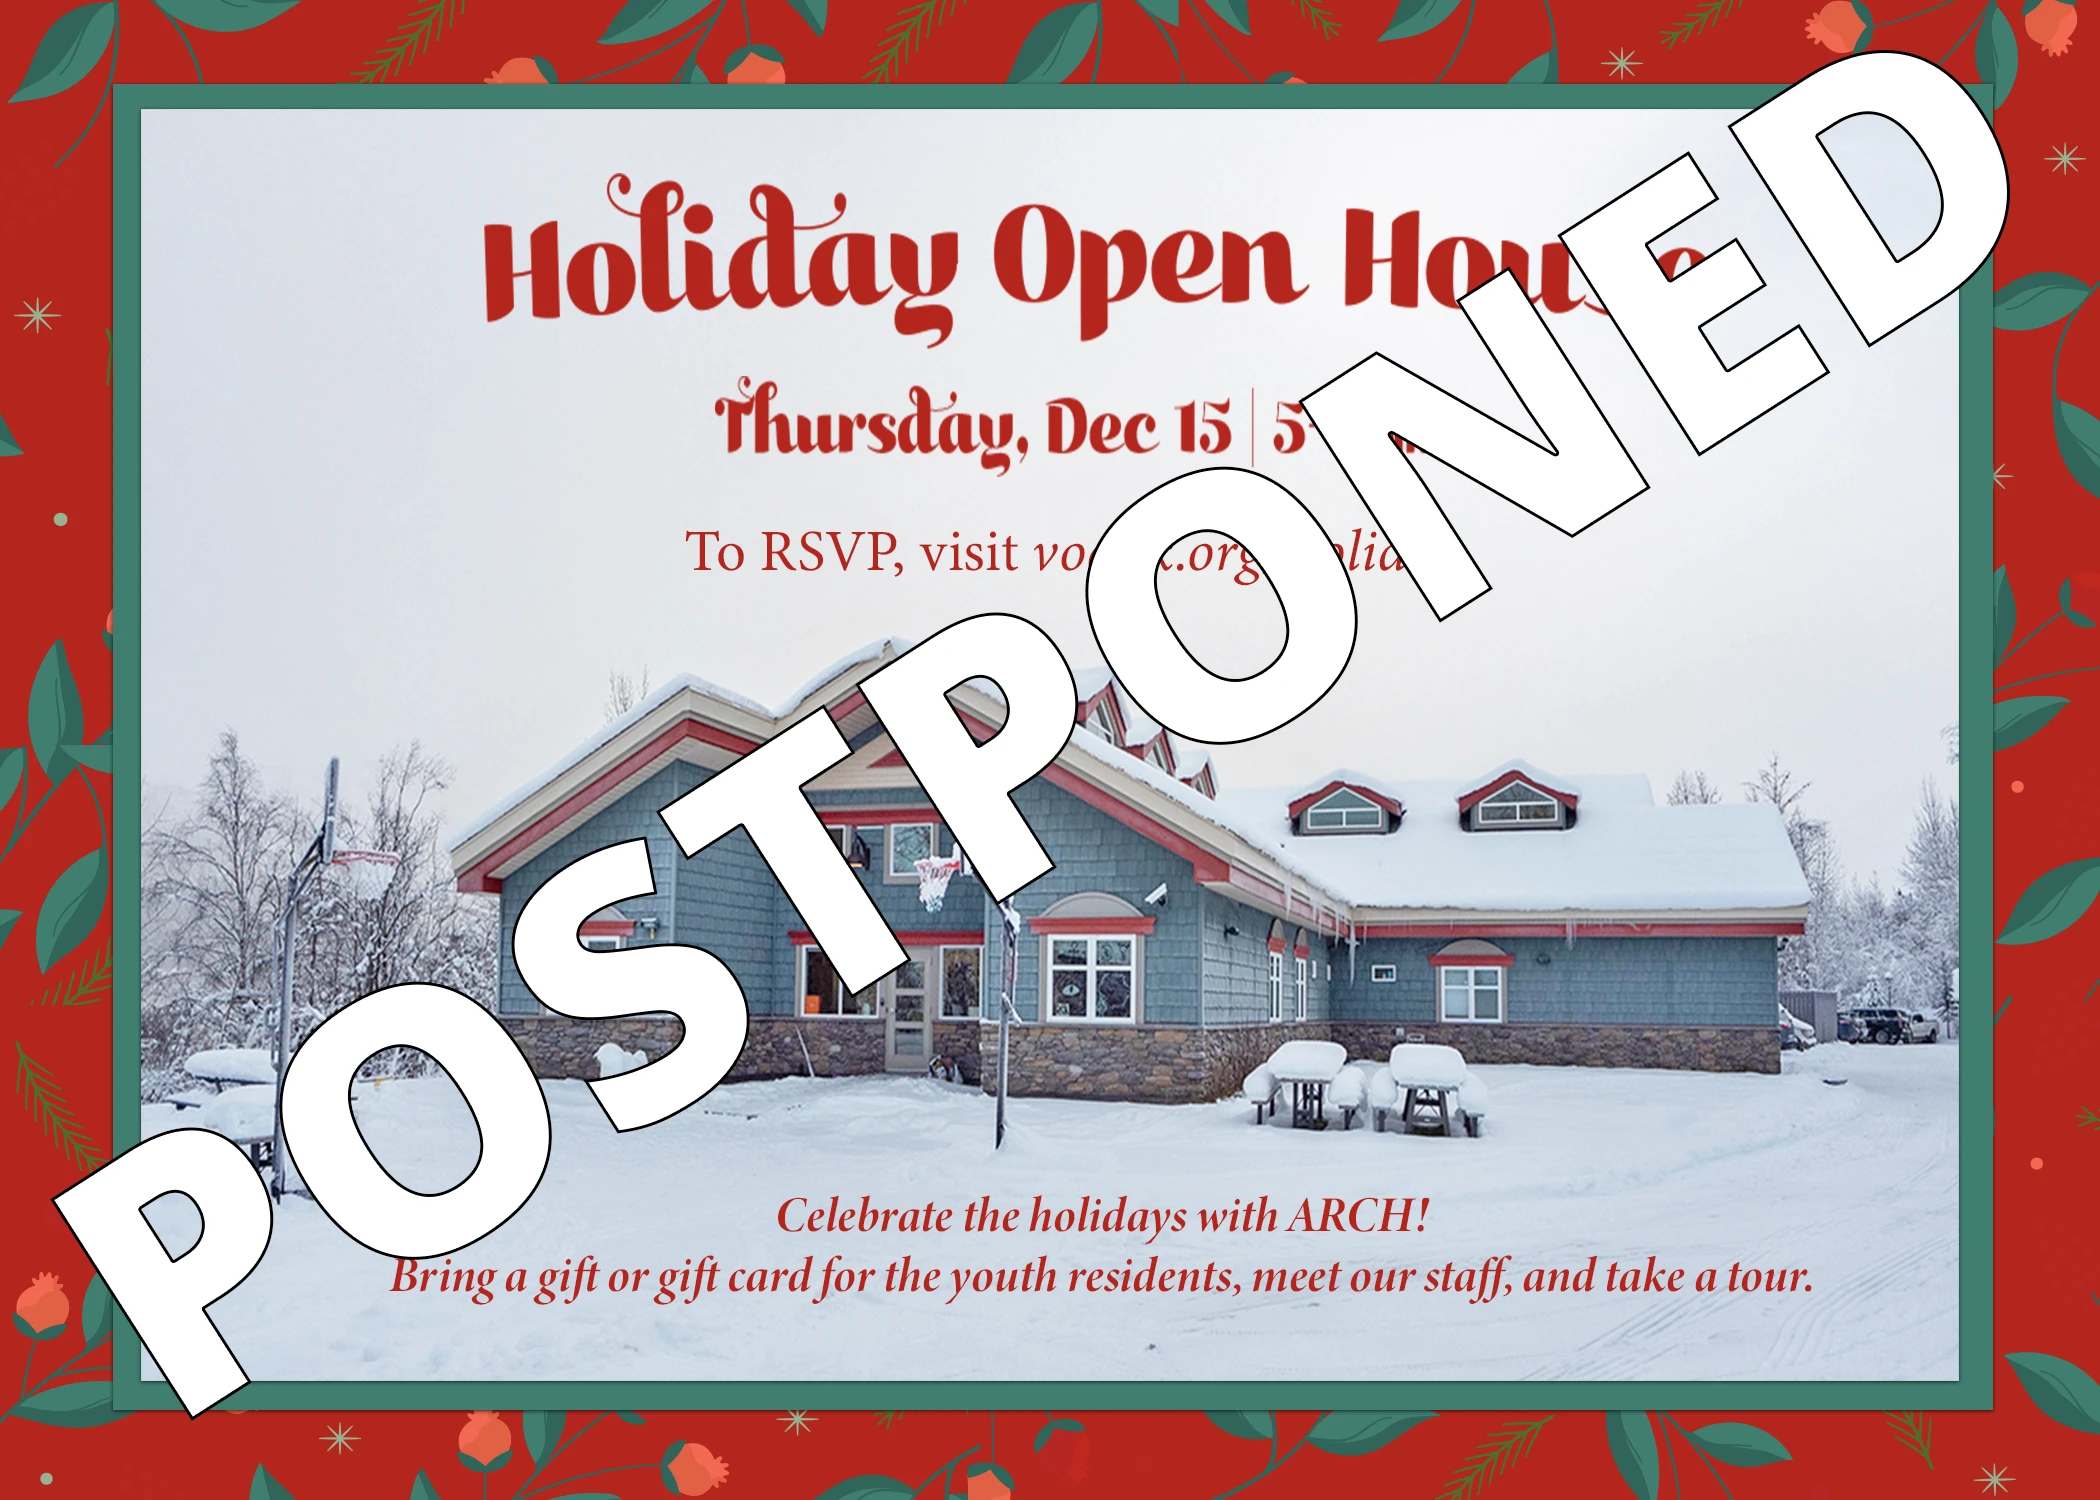 Photo of residential facility during winter with text "holiday open house" - POSTPONED is diagonal across the image